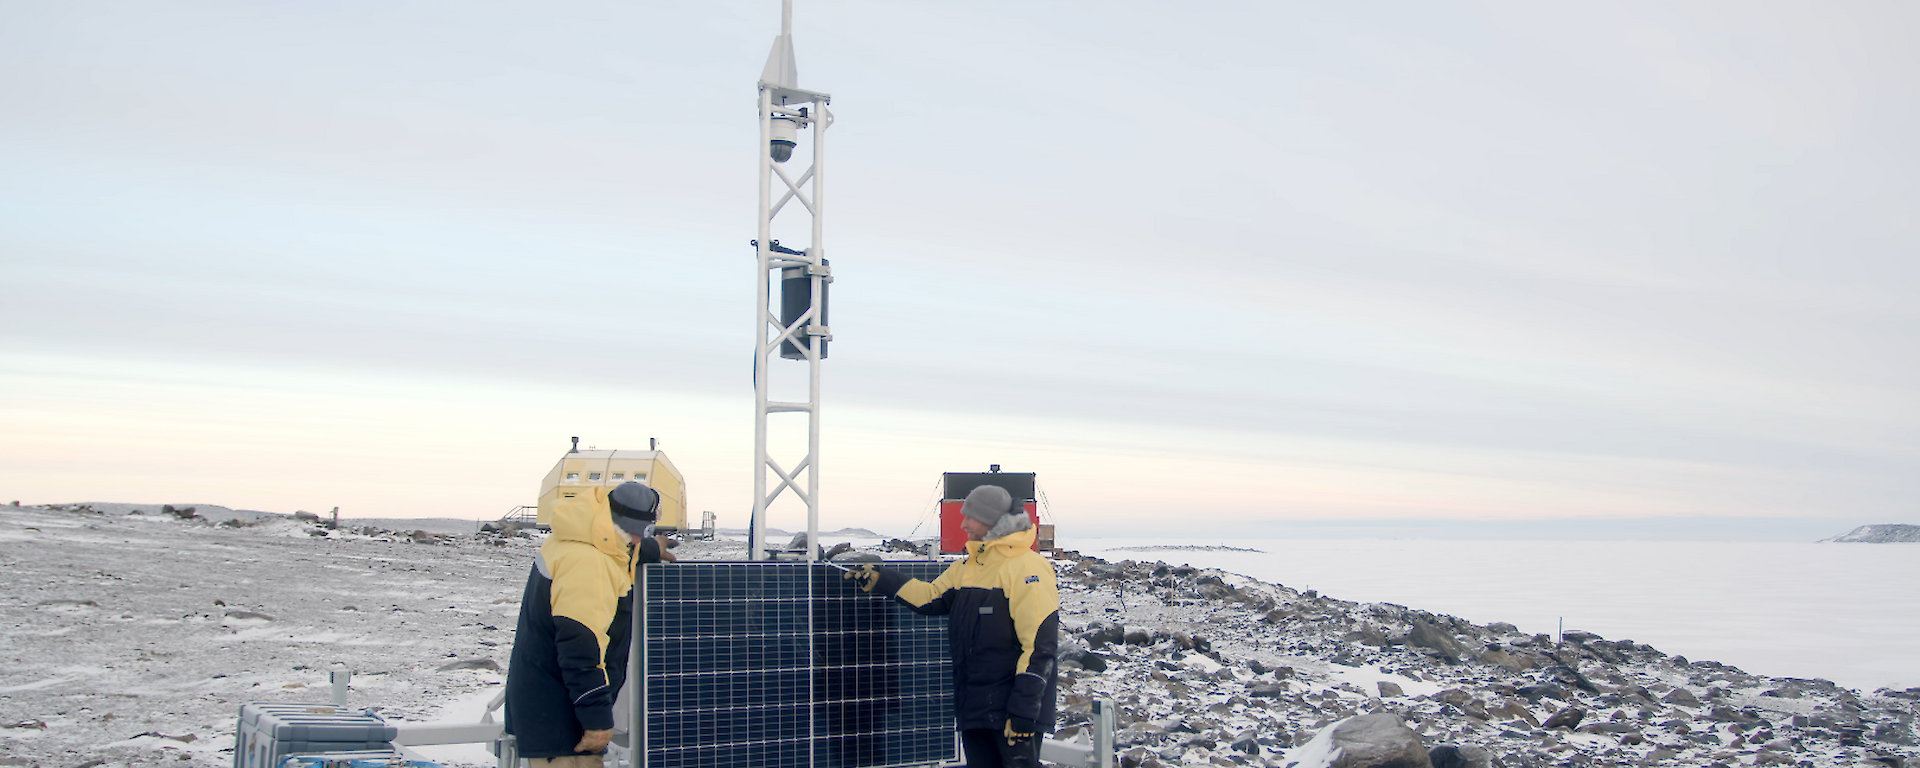 Two men in yellow jackets stand next to solar panels connected to a metal tower